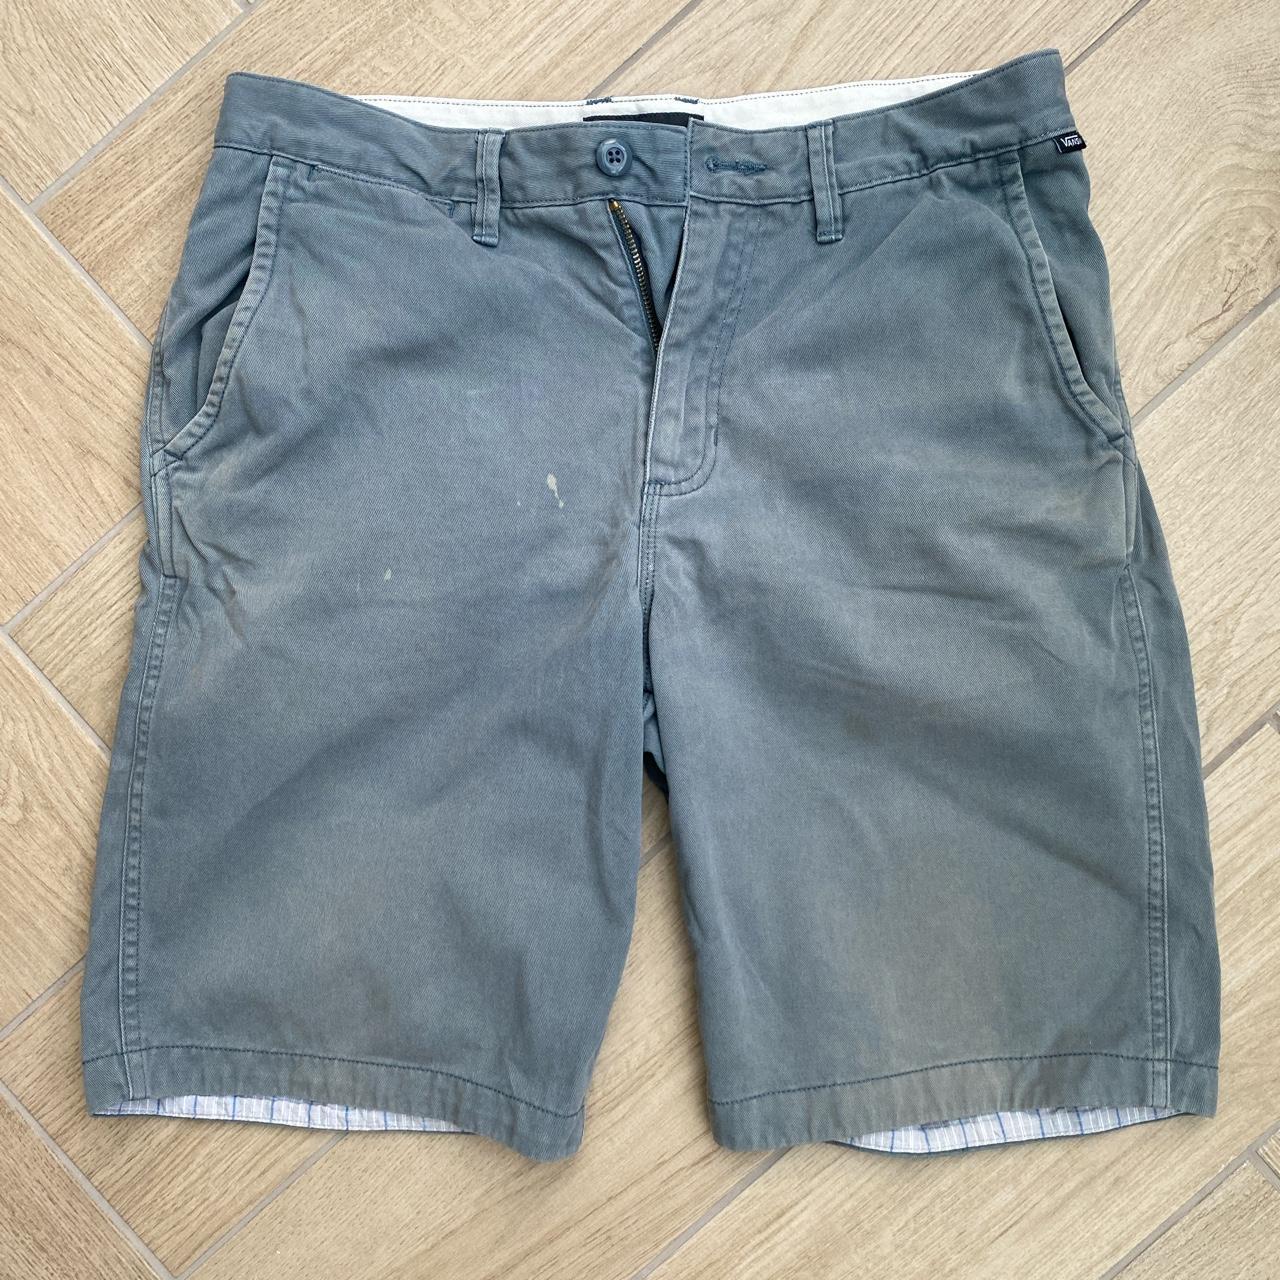 Vans - Chino shorts - Blue - Size: 32W Stained,... - Depop